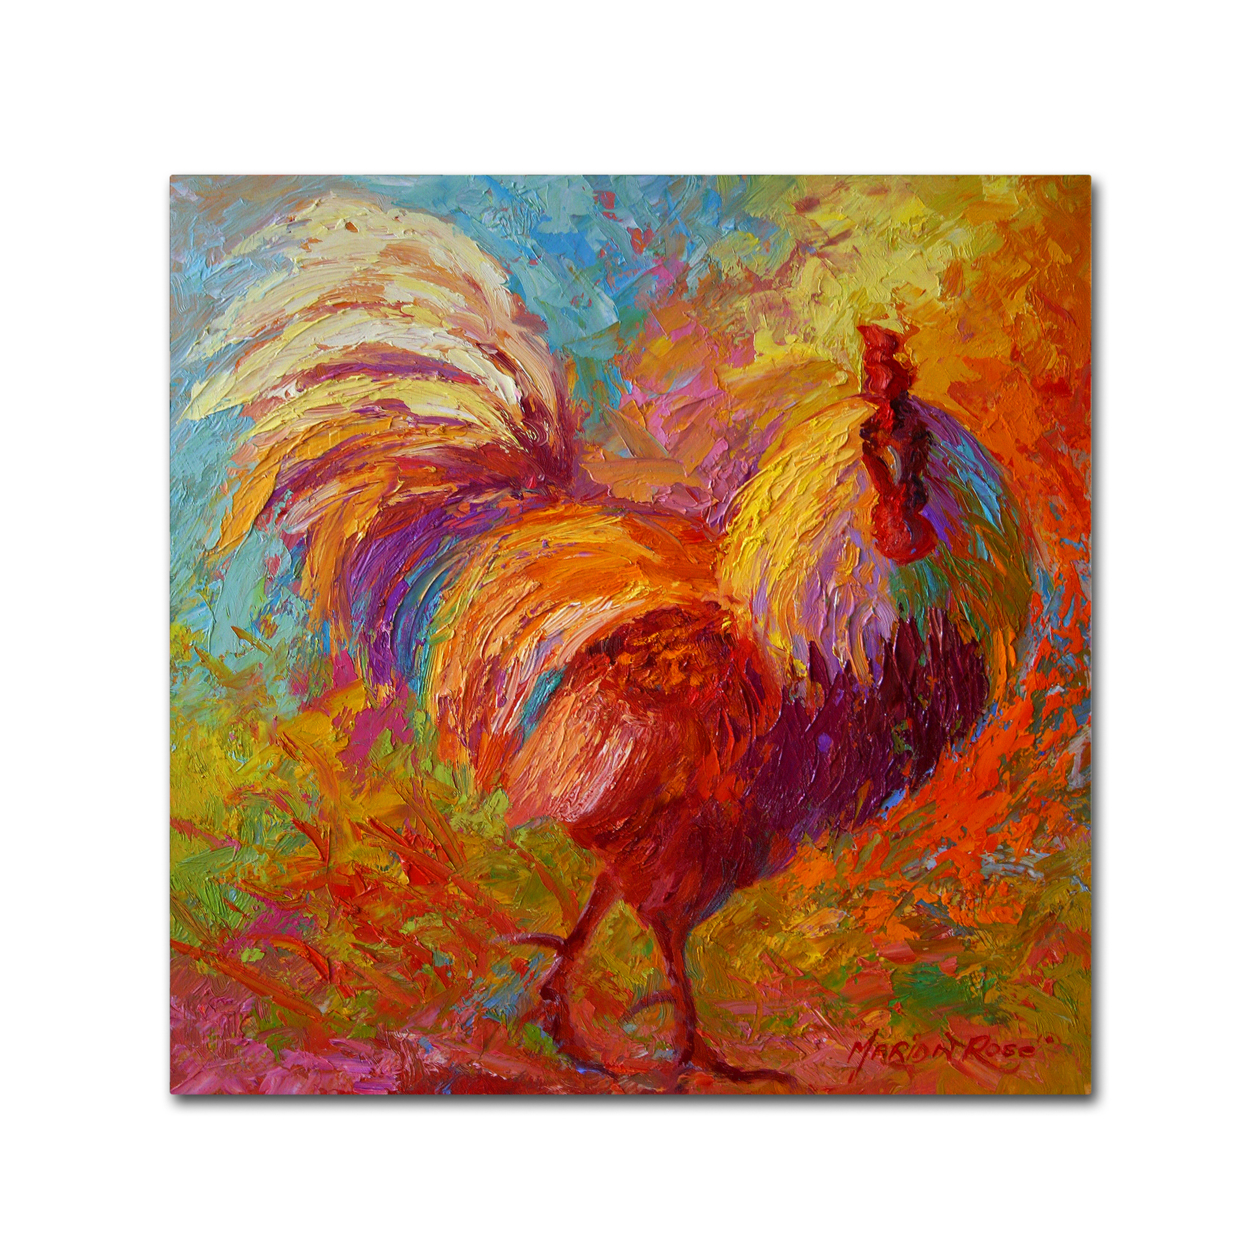 Marion Rose 'Rooster 6' Ready To Hang Canvas Art 14 X 14 Inches Made In USA